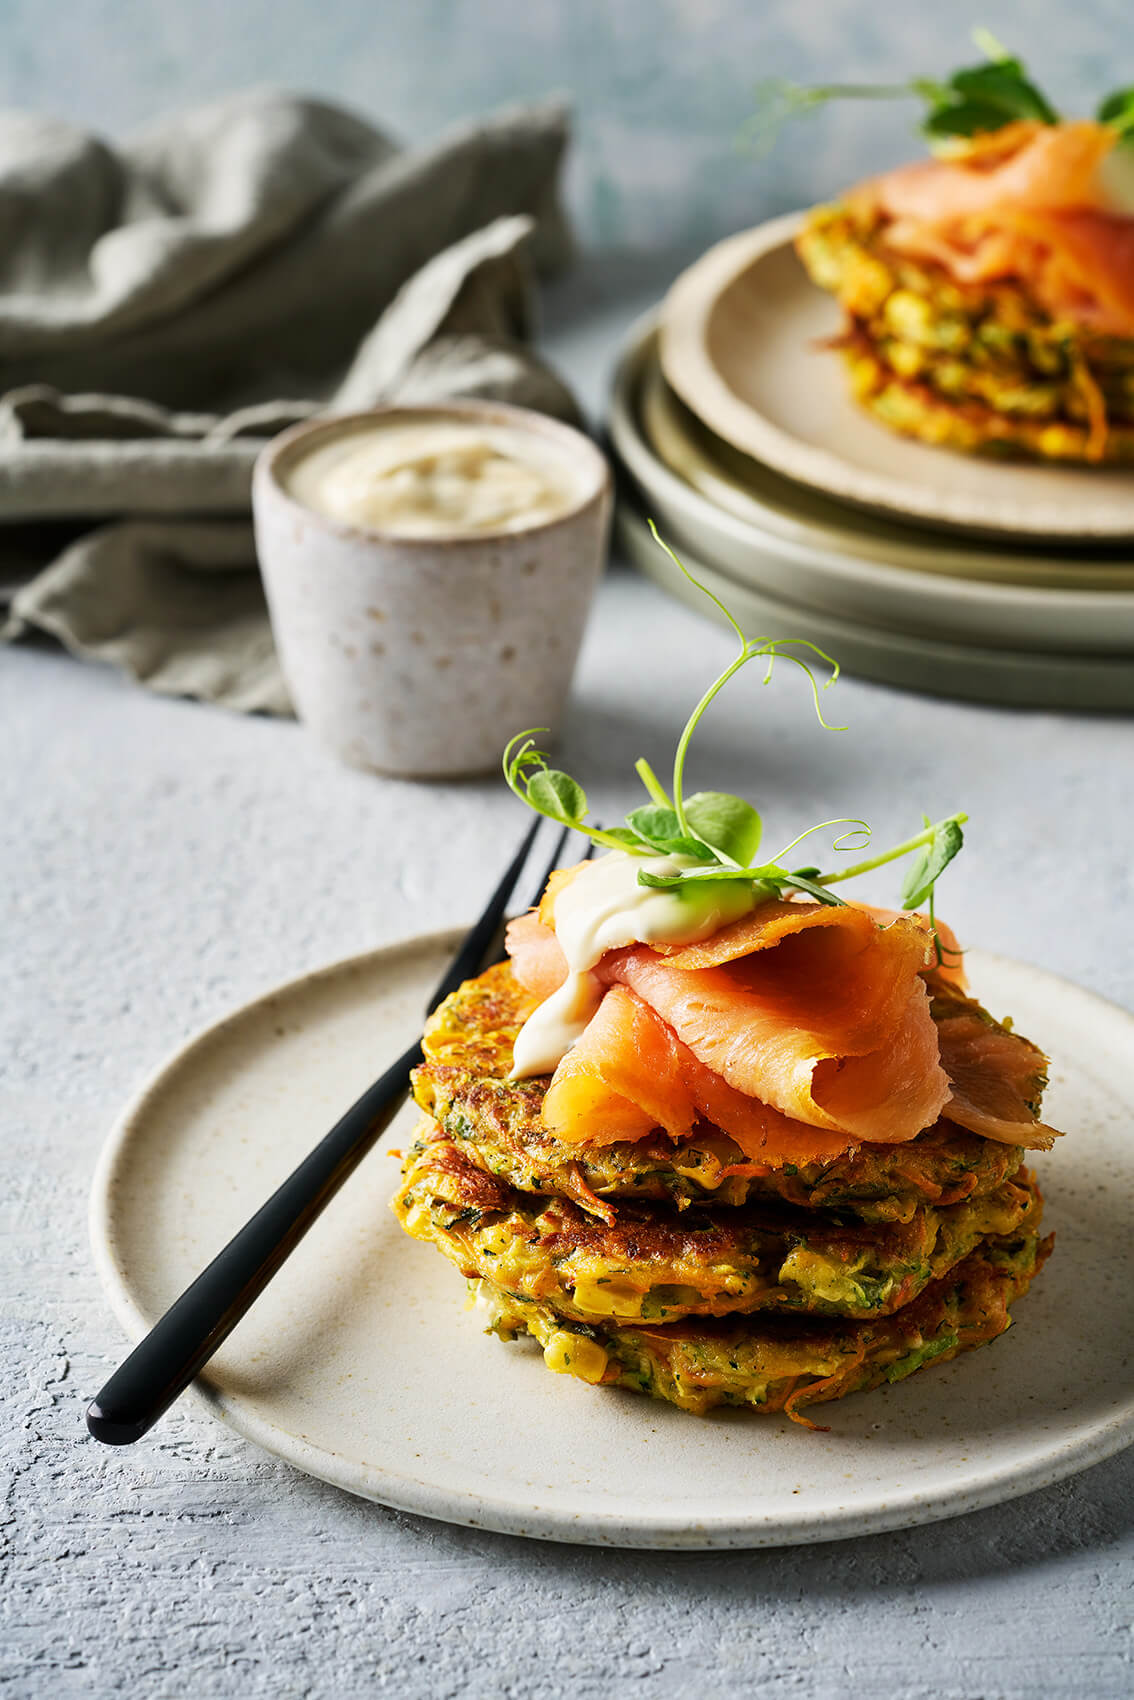 Zucchini, sweet potato and corn fritters - Miele Experience Centre